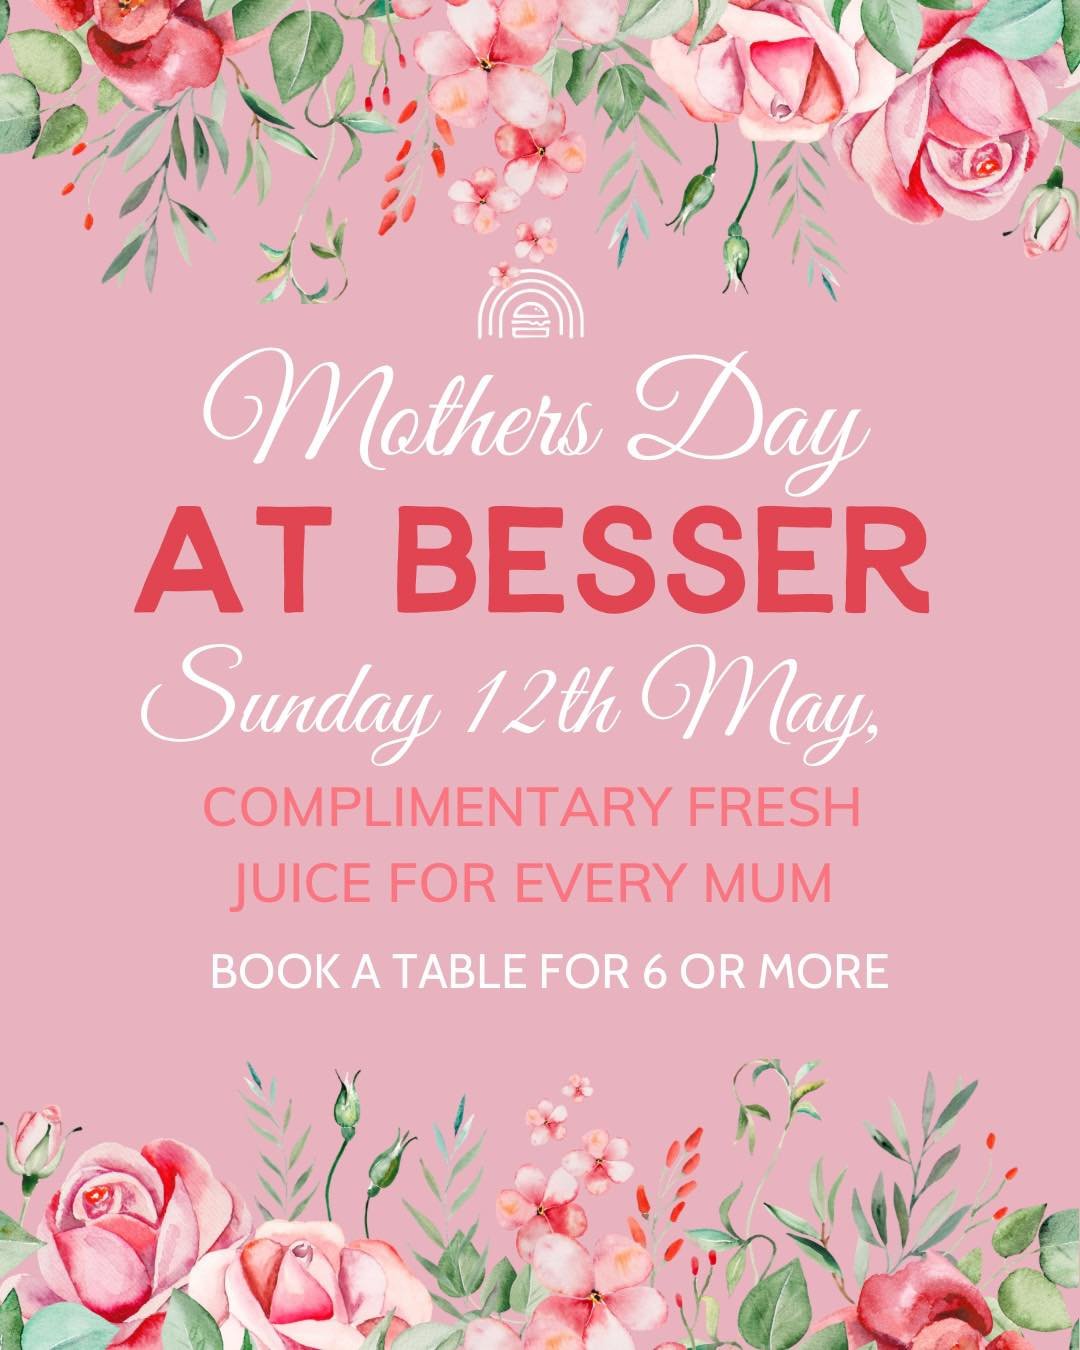 With Mother's Day fast approaching, we want to take a moment to express our gratitude to all the amazing Mum&rsquo;s in our Besser community 🩷 

And what better way to cheers our amazing ladies than with a special fresh juice to celebrate the mother